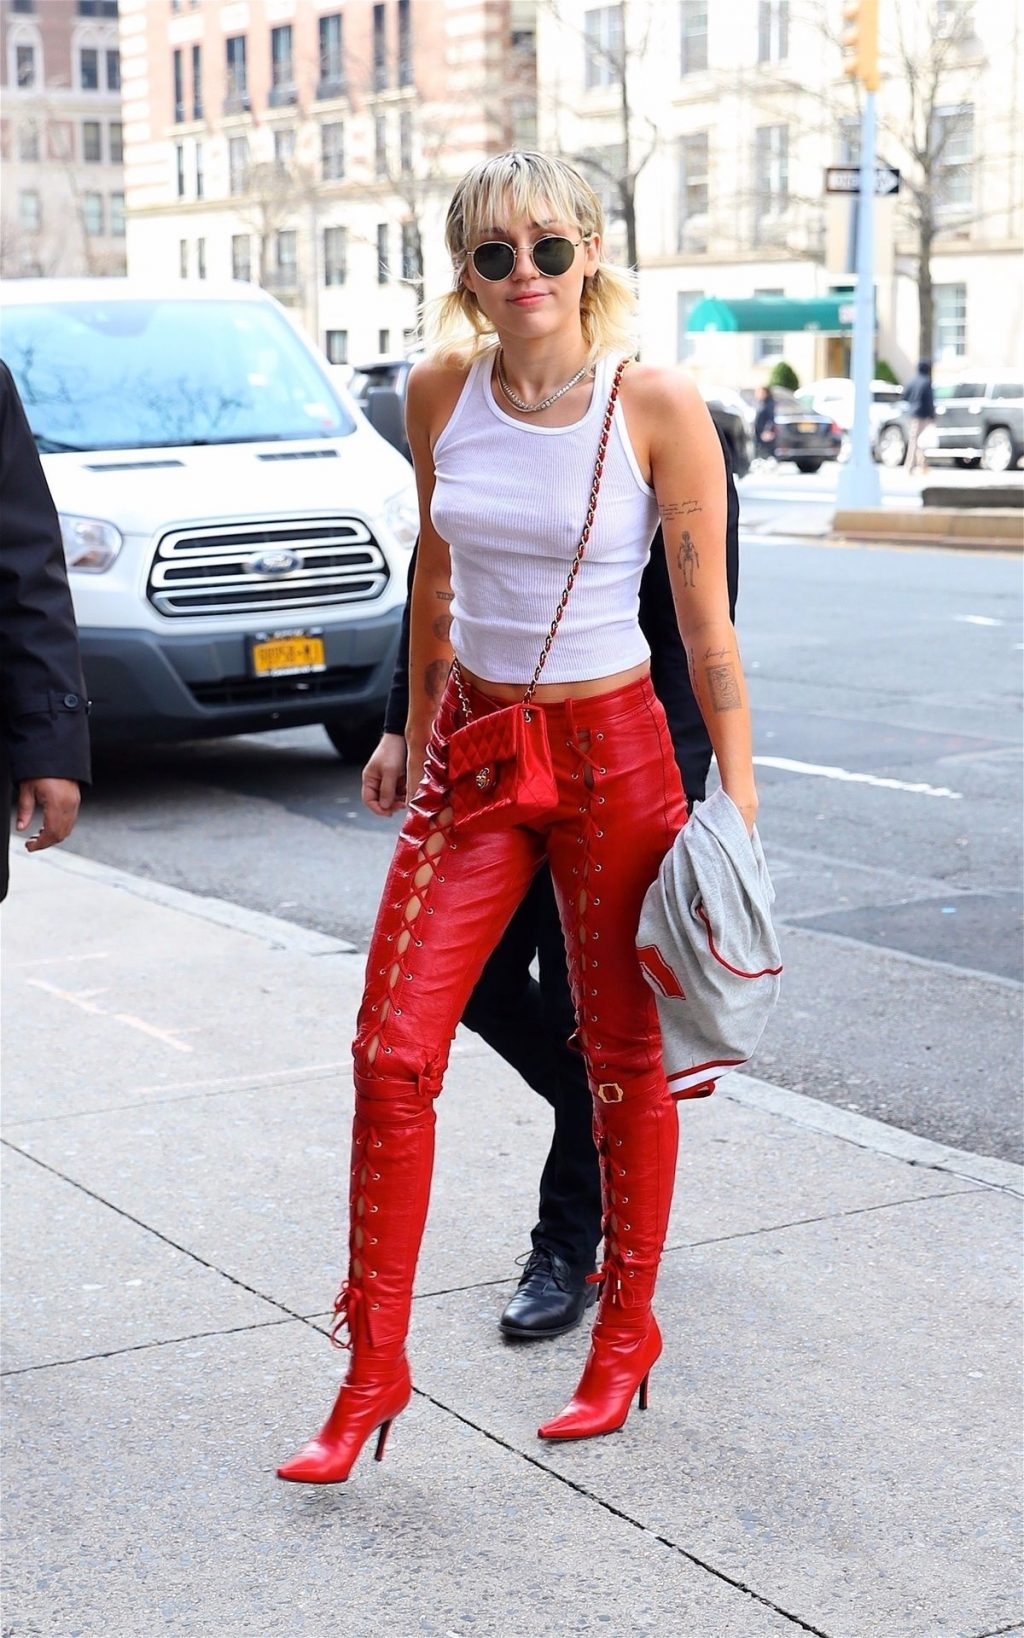 Braless Miley Cyrus is Red Hot in Leather Lace Up Biker Pants with a Tank Top (60 Photos)